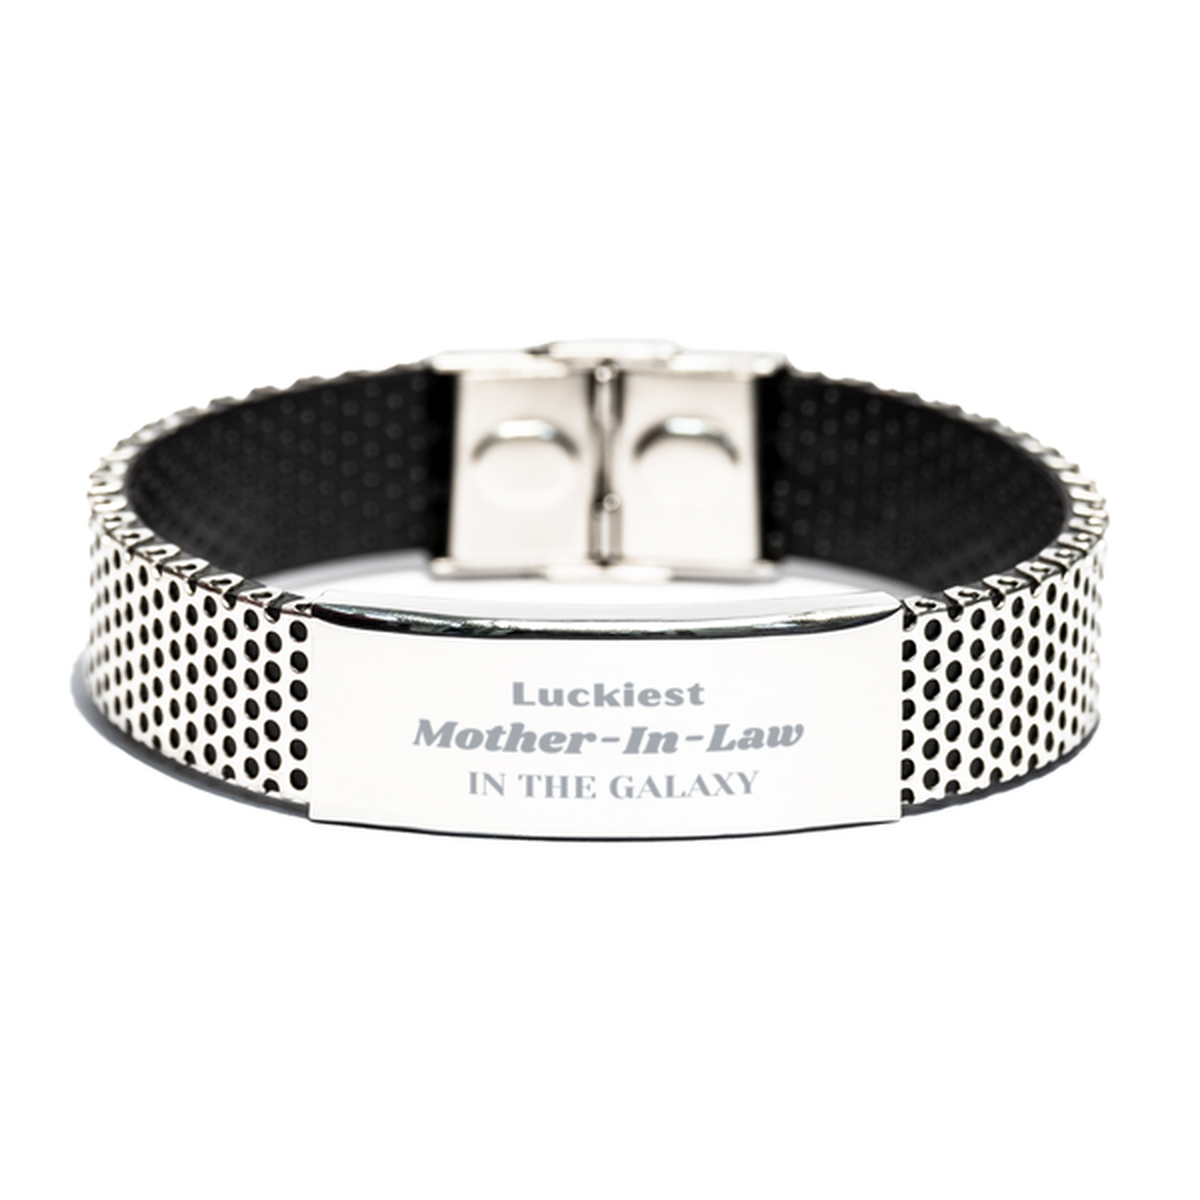 Luckiest Mother-In-Law in the Galaxy, To My Mother-In-Law Engraved Gifts, Christmas Mother-In-Law Stainless Steel Bracelet Gifts, X-mas Birthday Unique Gifts For Mother-In-Law Men Women